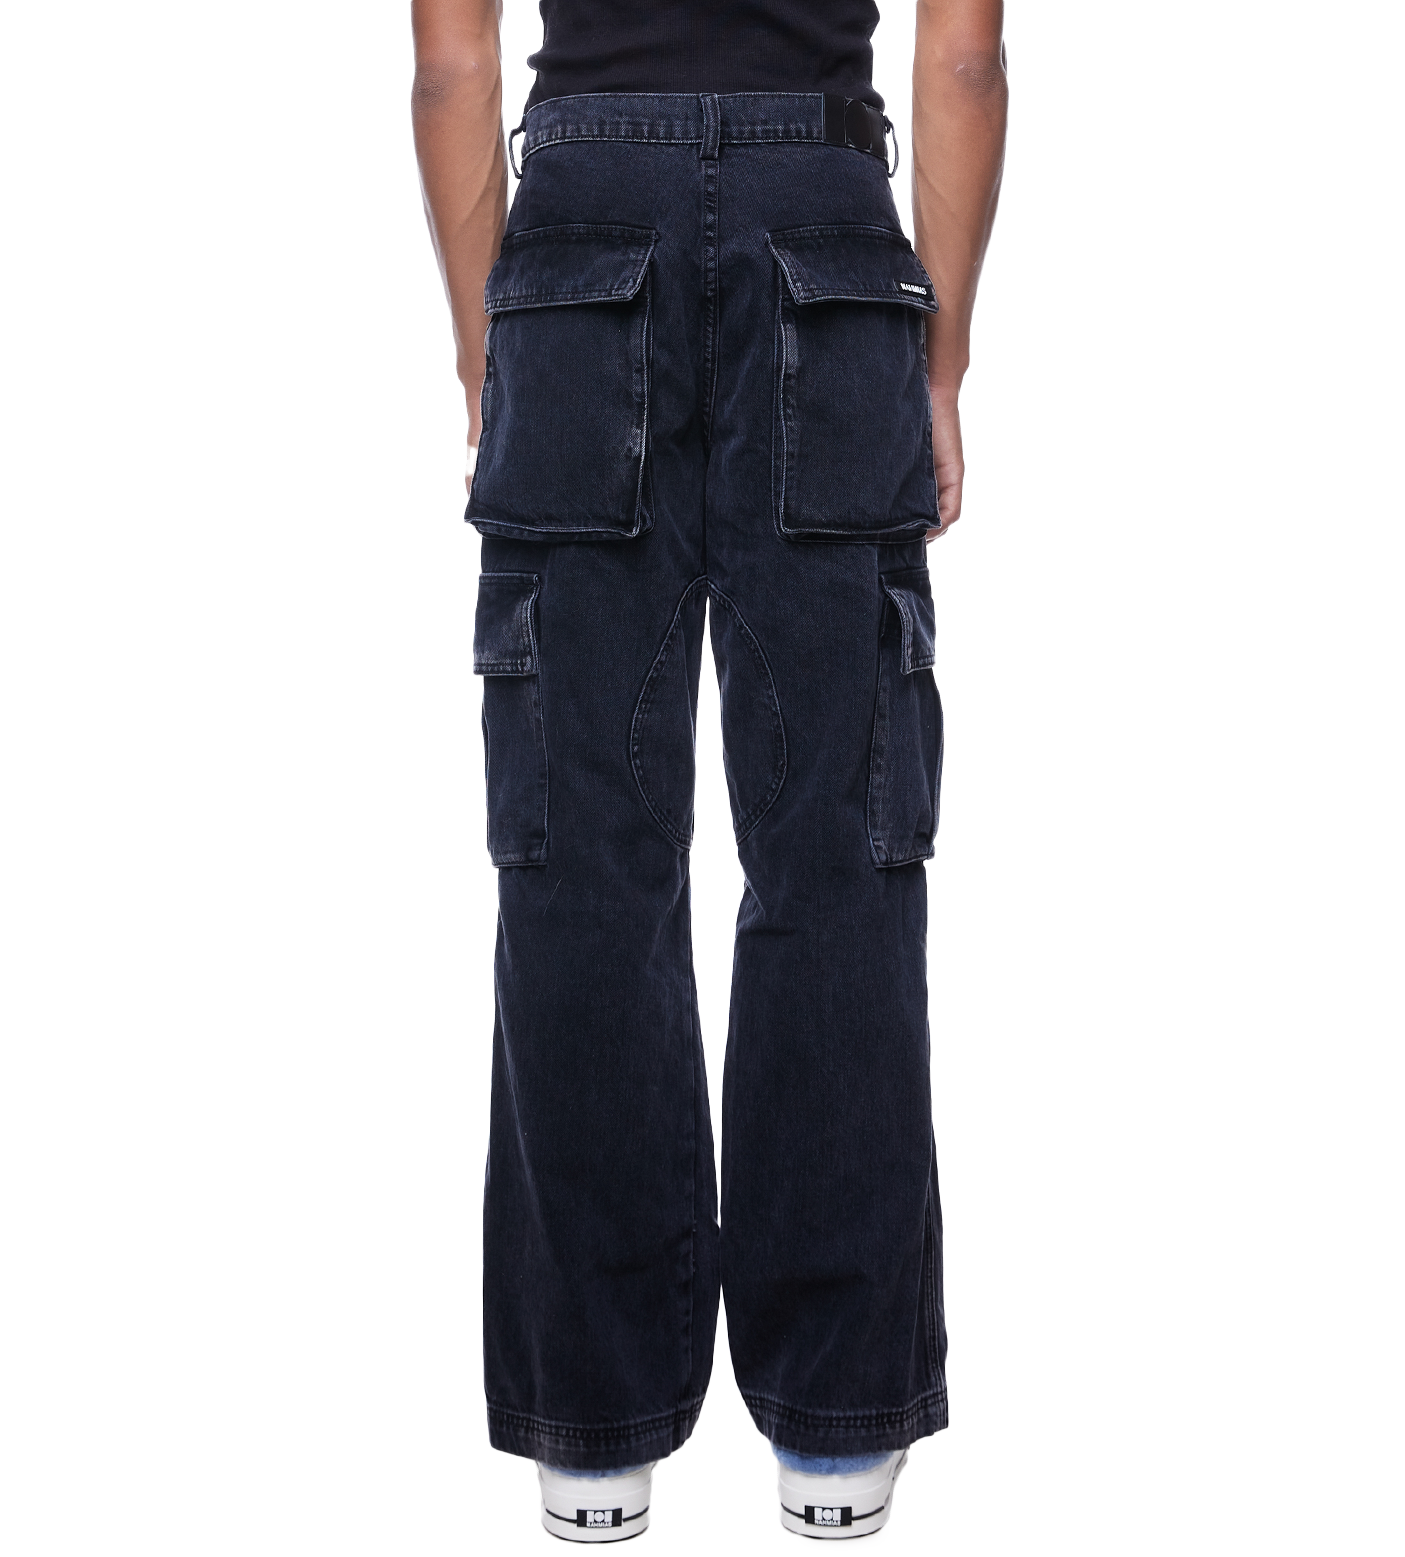 Mid-rise Cargo Jeans Charcoal Wash